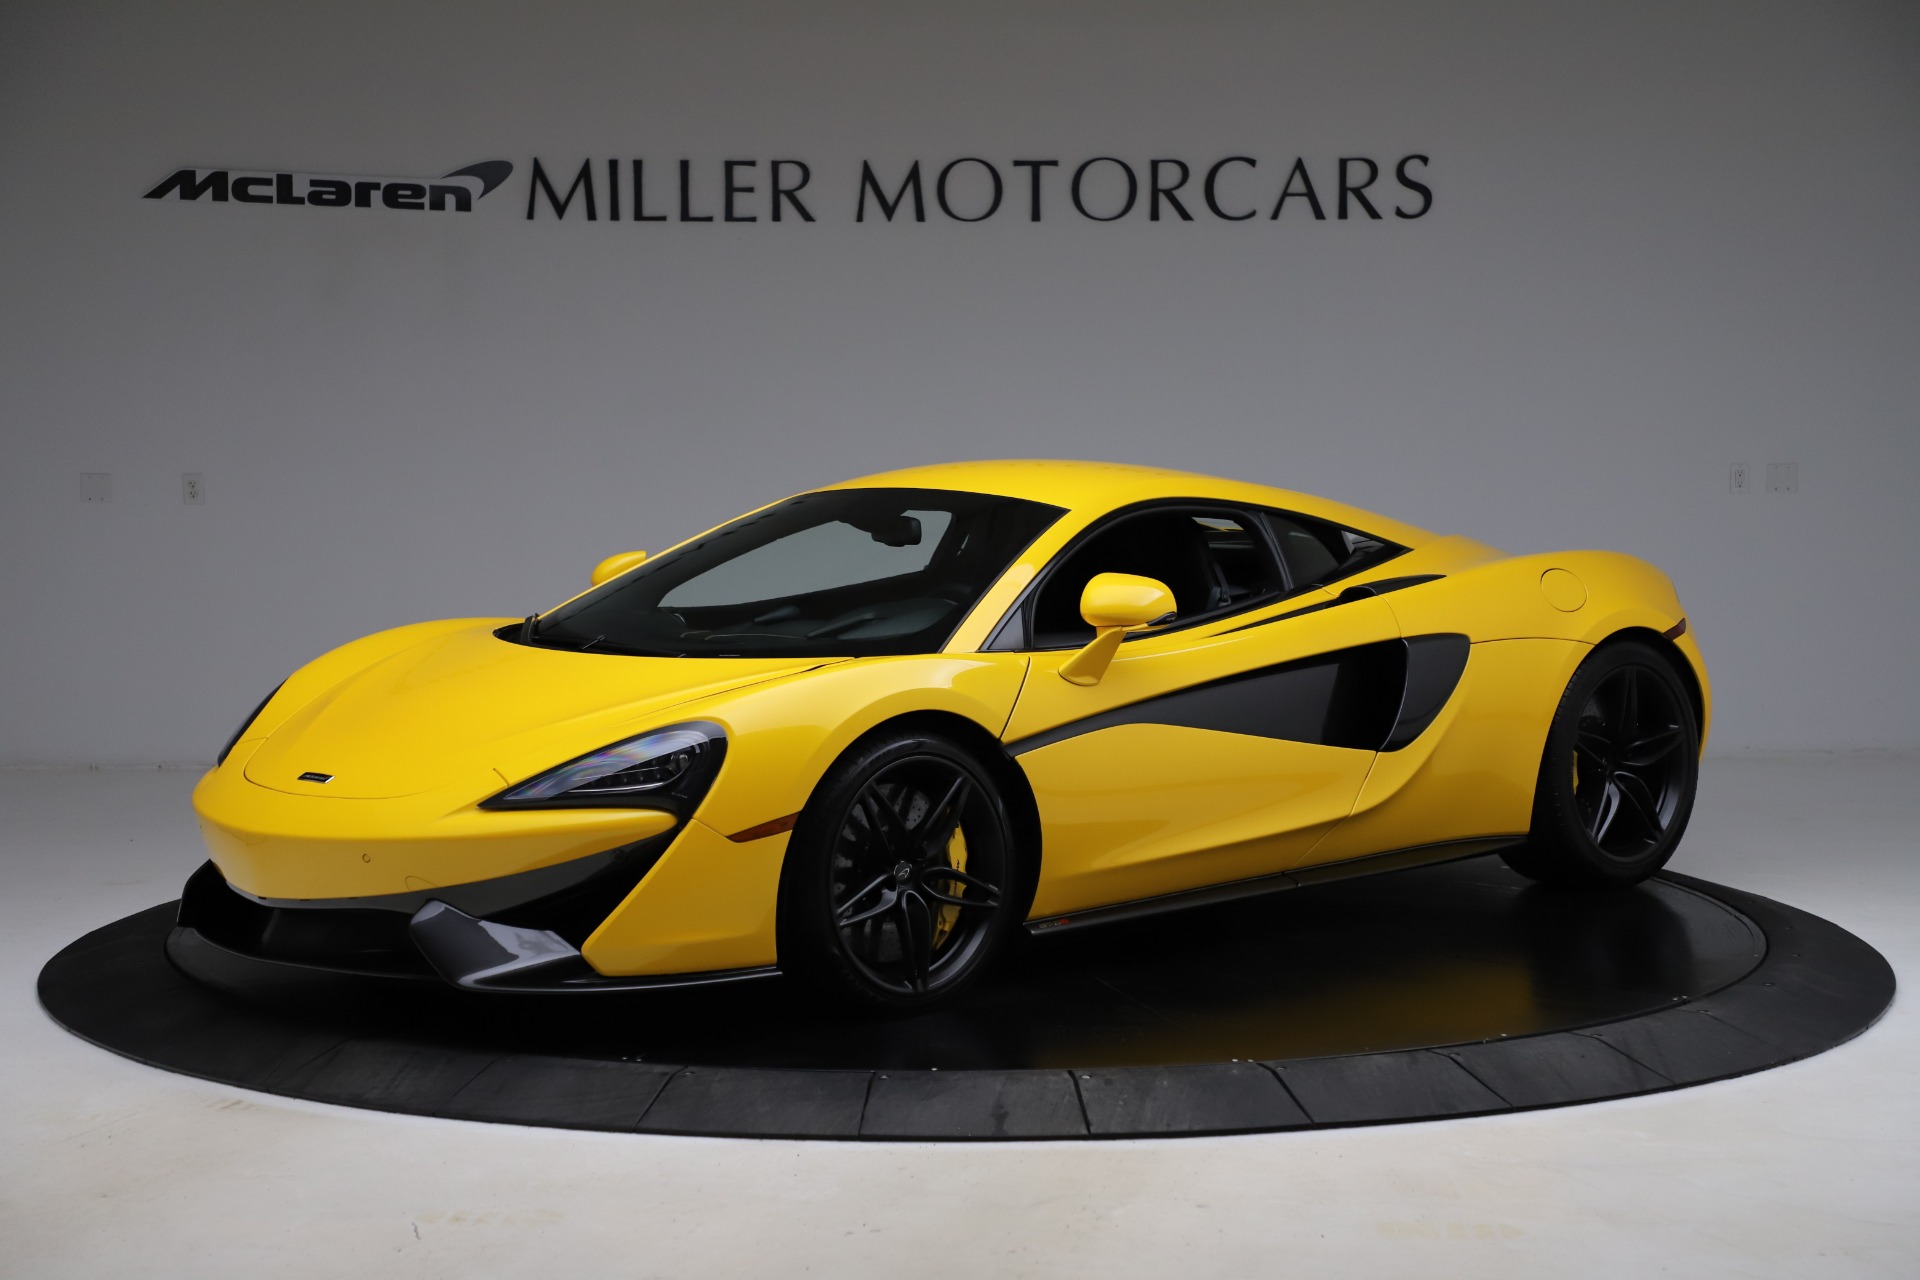 Used 2016 McLaren 570S for sale Sold at Aston Martin of Greenwich in Greenwich CT 06830 1